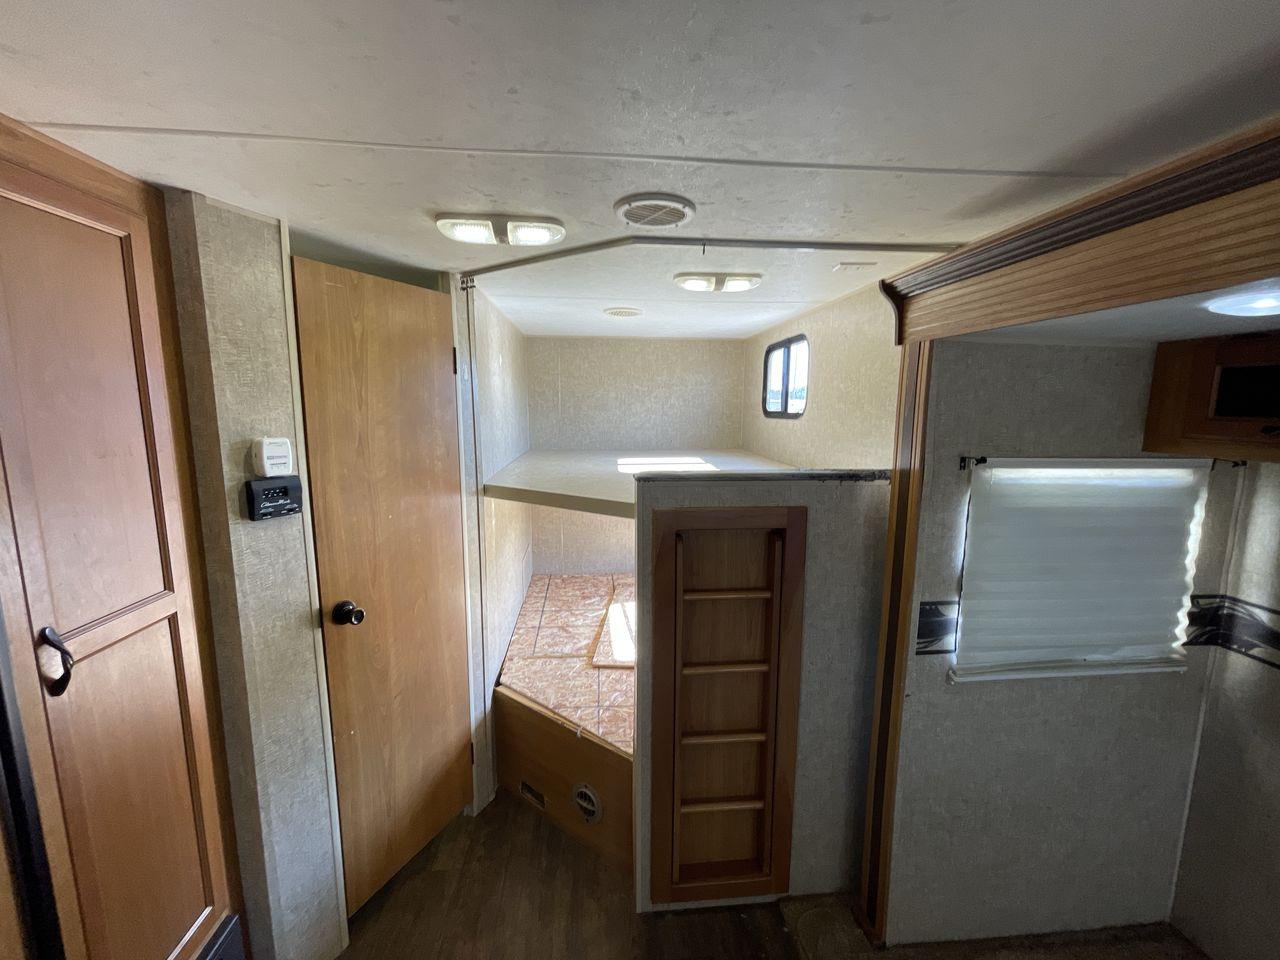 2014 BEIGE KZRV SPREE 282BHS (4EZTL2826E8) , Length: 31.33 ft. | Dry Weight: 5,610 lbs. | Gross Weight: 6,800 lbs. | Slides: 1 transmission, located at 4319 N Main St, Cleburne, TX, 76033, (817) 678-5133, 32.385960, -97.391212 - Take the 2014 KZ RV Spree 282BHS Travel Trailer on your next vacation. Comfort, style, and functionality are all combined in this well-designed travel trailer, which makes it a great option for families or groups looking for a dependable and roomy mobile home. This trailer measures 31.33 ft in le - Photo #19